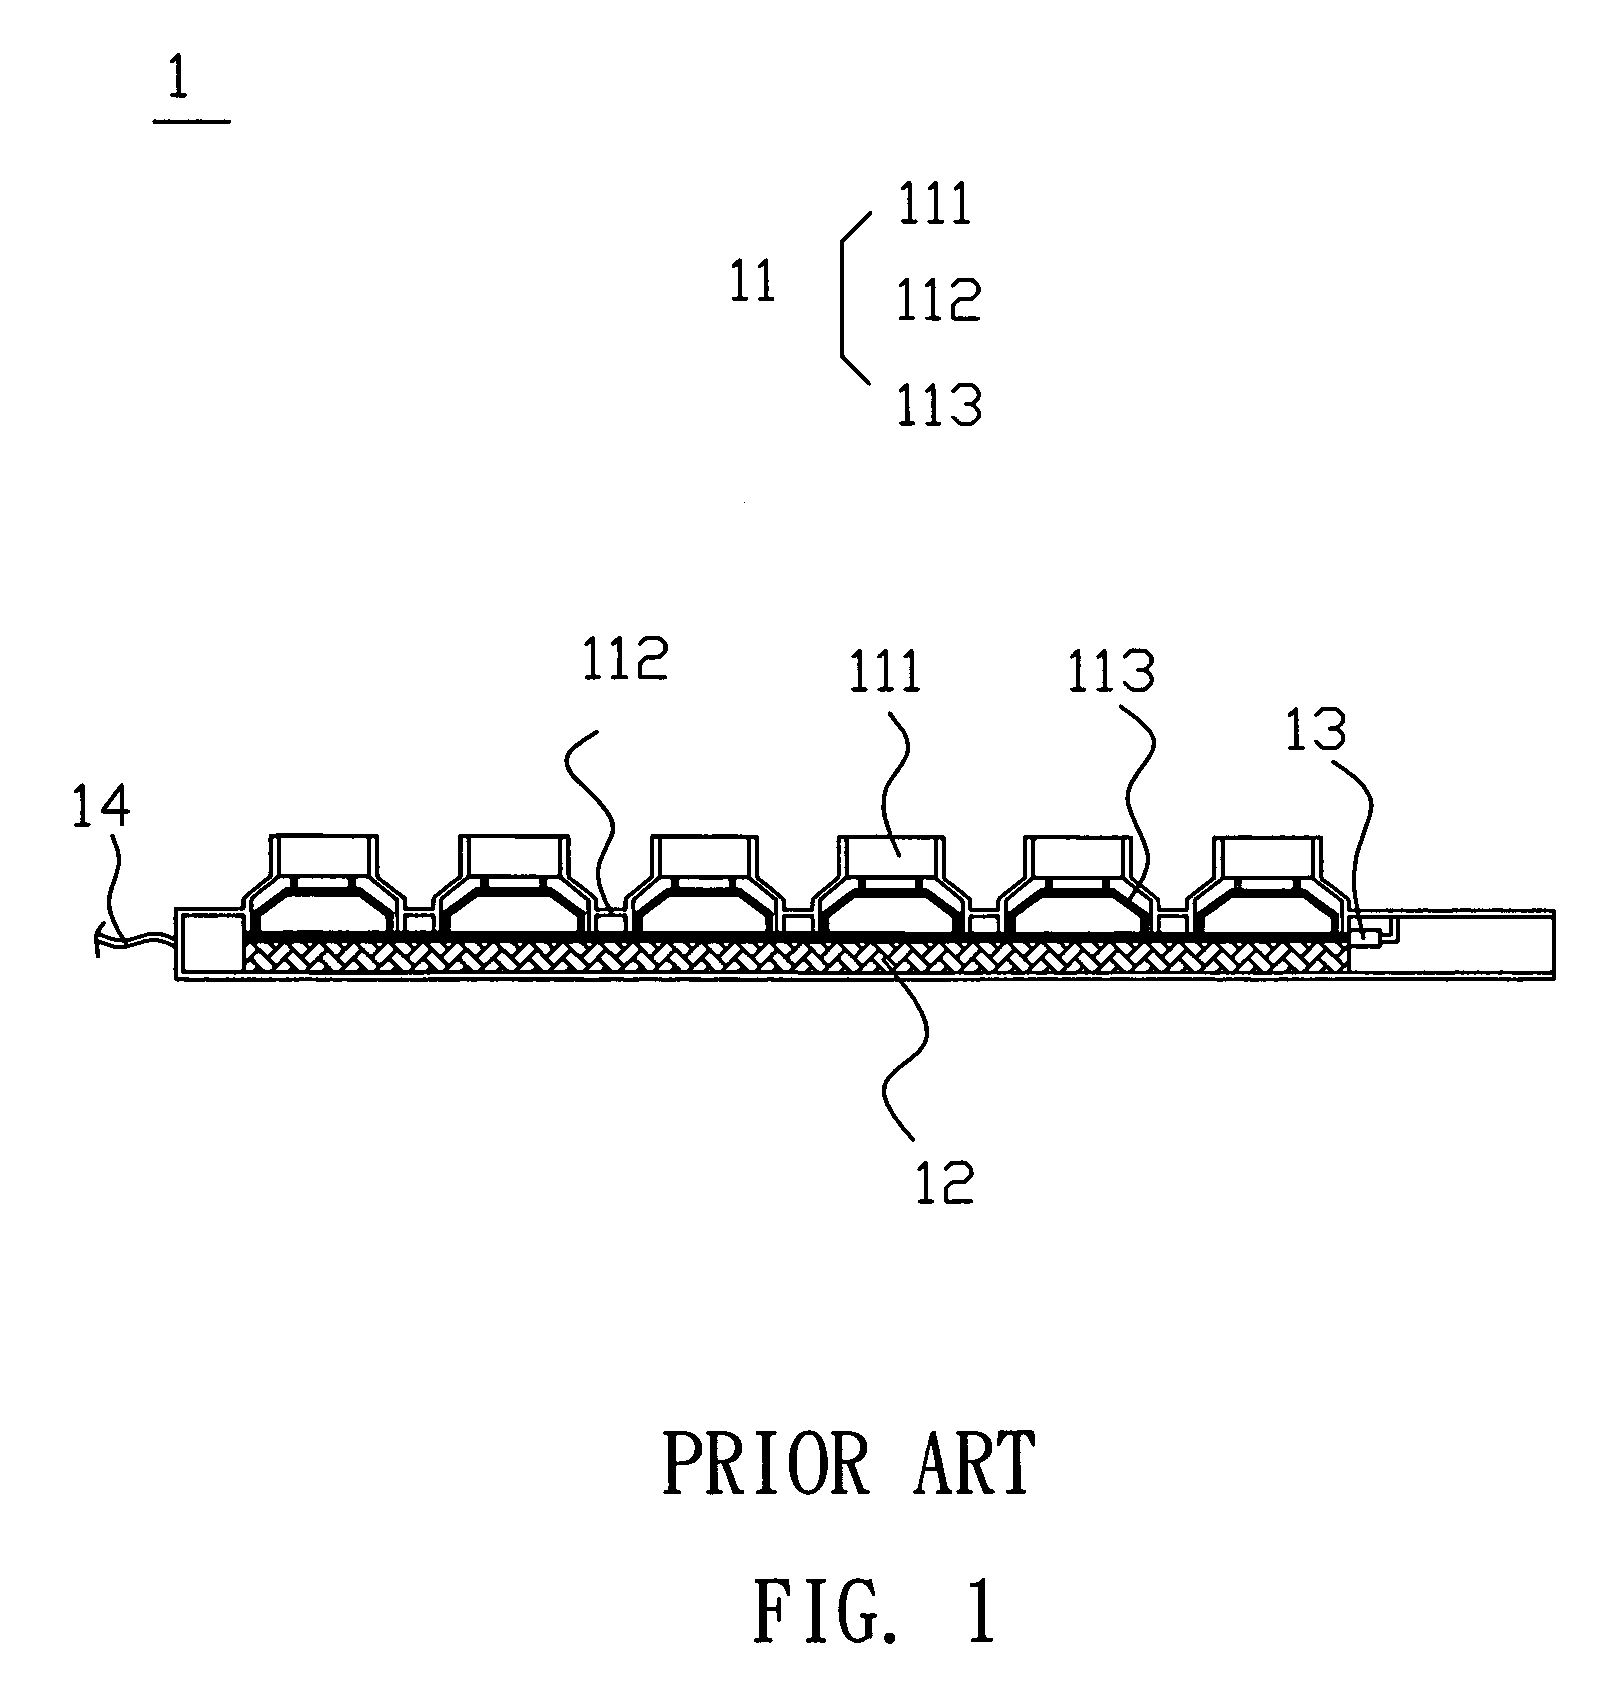 Electrical apparatus with illumination device